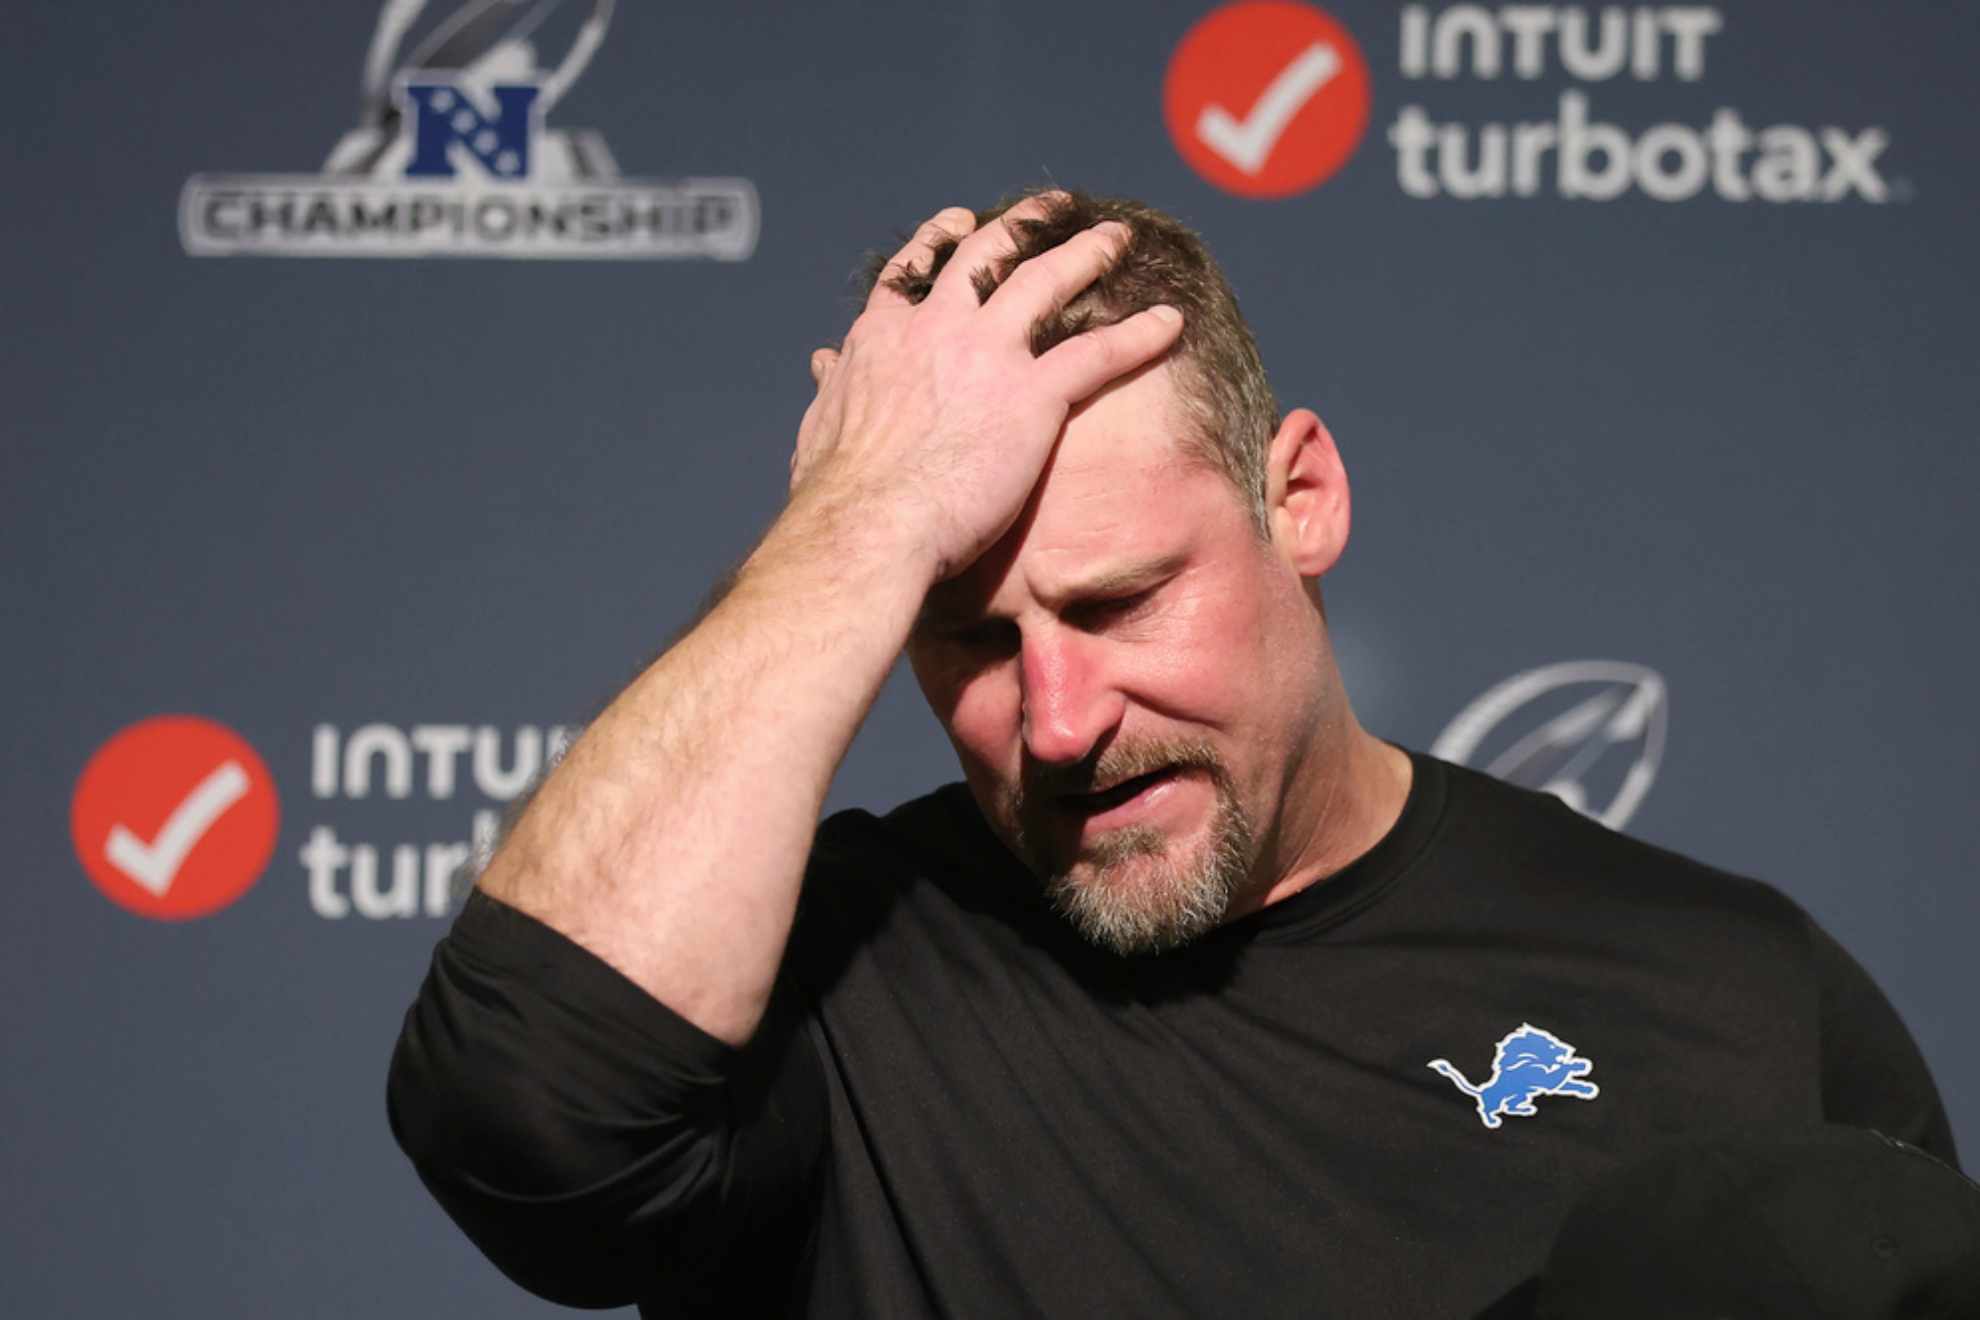 Dan Campbell reacts while speaking at a news conference after the NFC Championship /